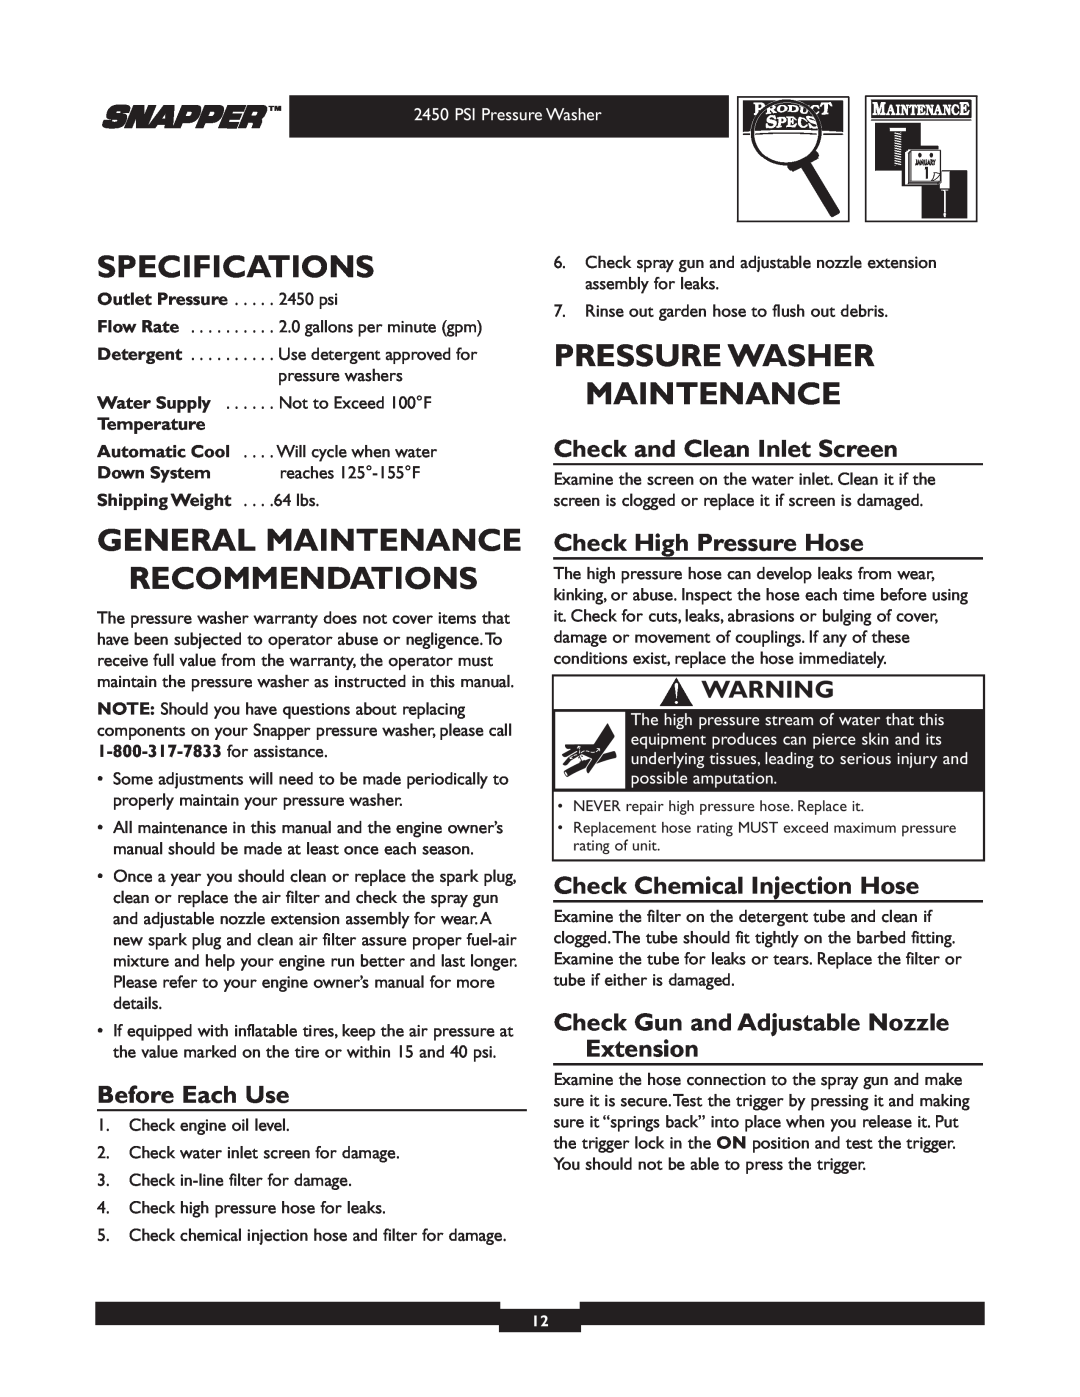 Snapper 020229 Specifications, Pressure Washer Maintenance, General Maintenance Recommendations, Before Each Use 